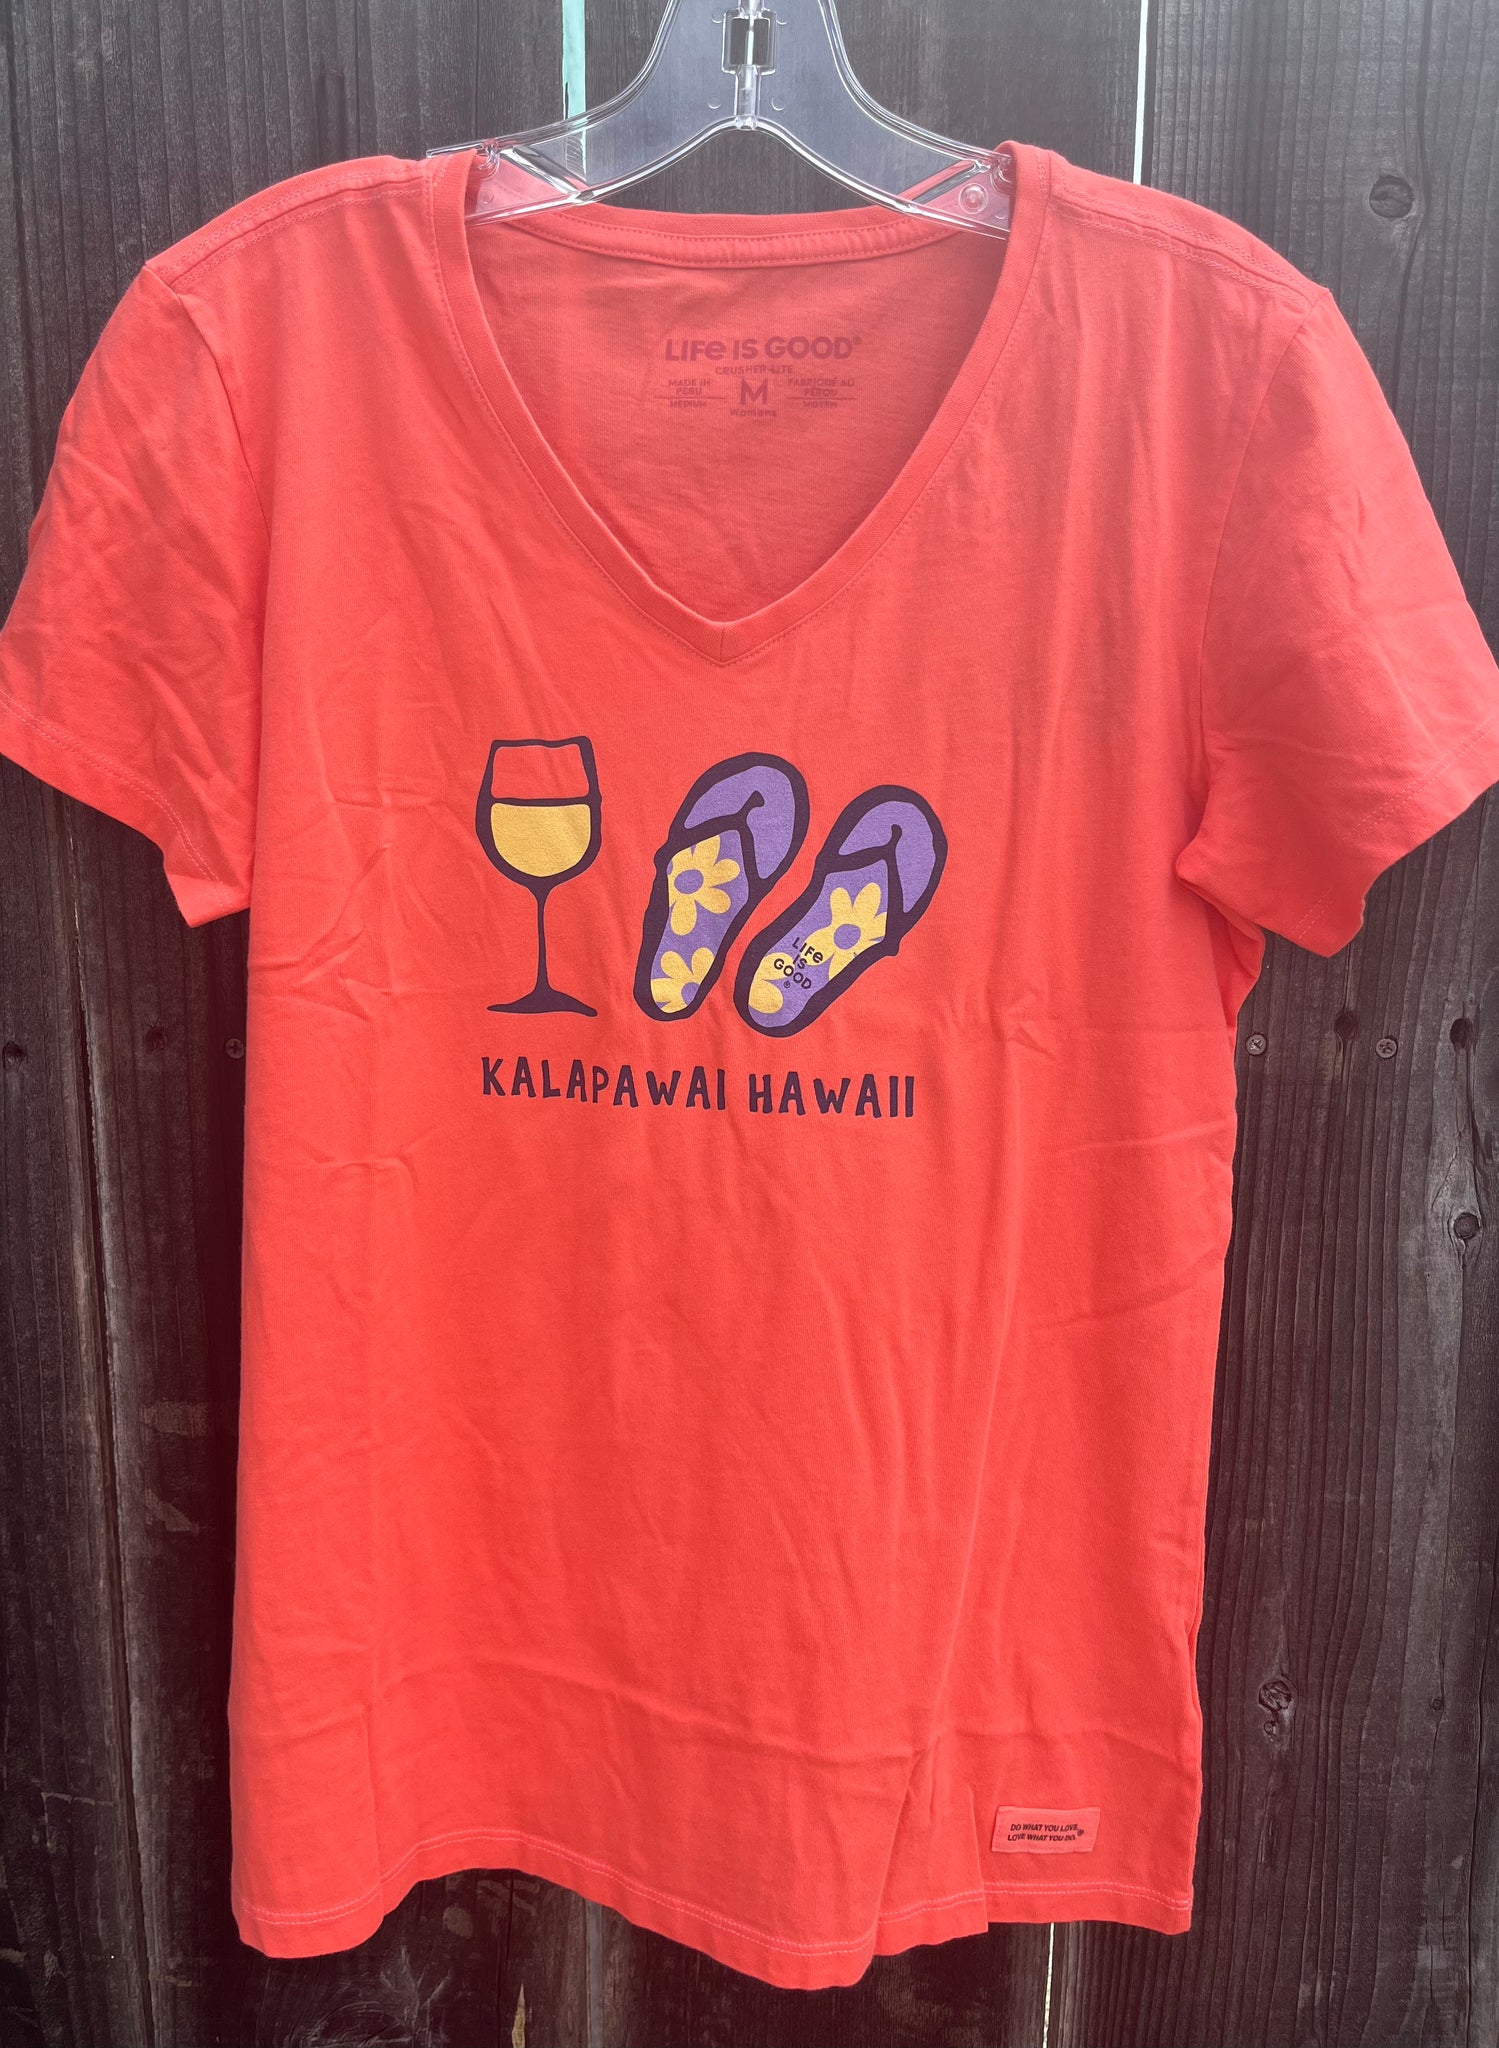 Life is Good Wine and Flip V-neck Tee